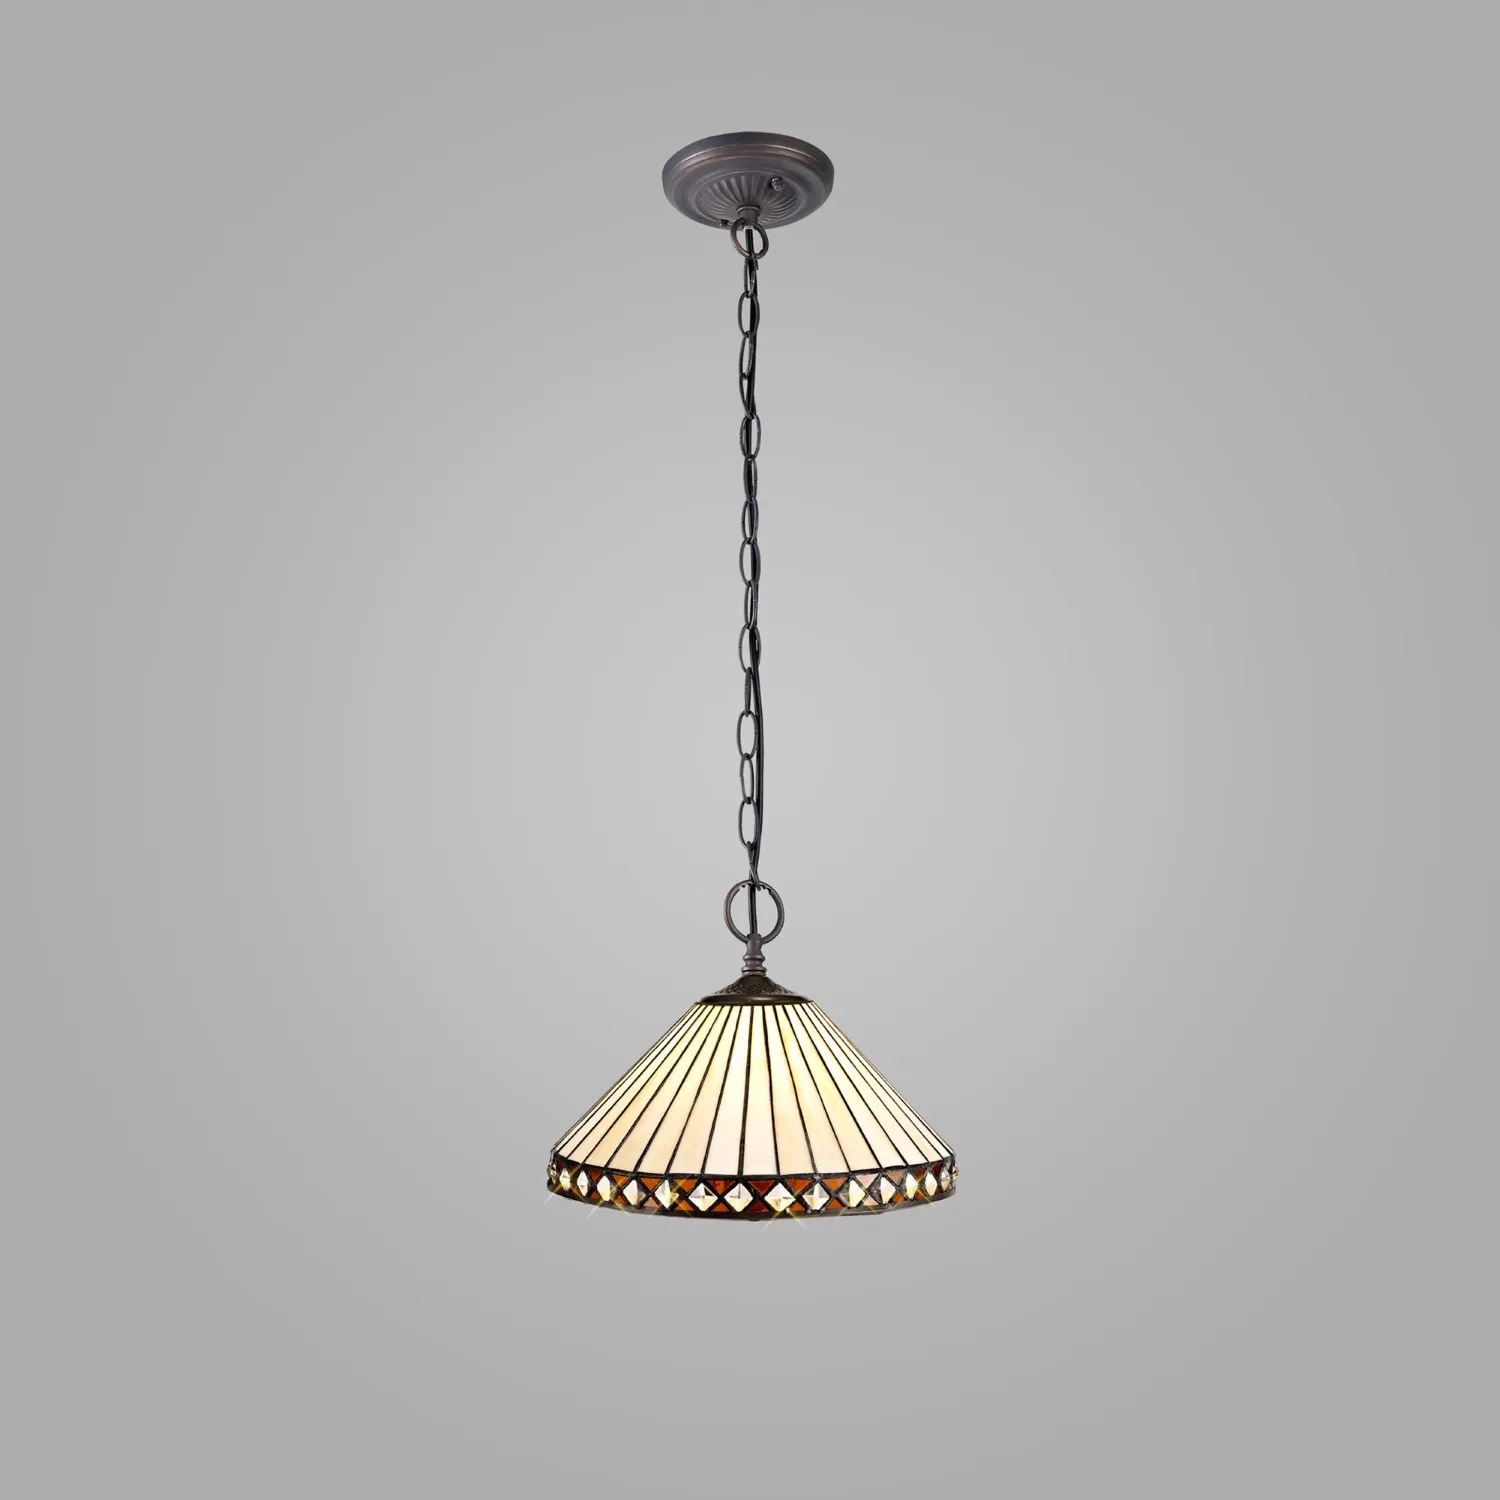 Rayleigh 2 Light Downlighter Pendant E27 With 30cm Tiffany Shade, Amber Cream Crystal Aged Antique Brass